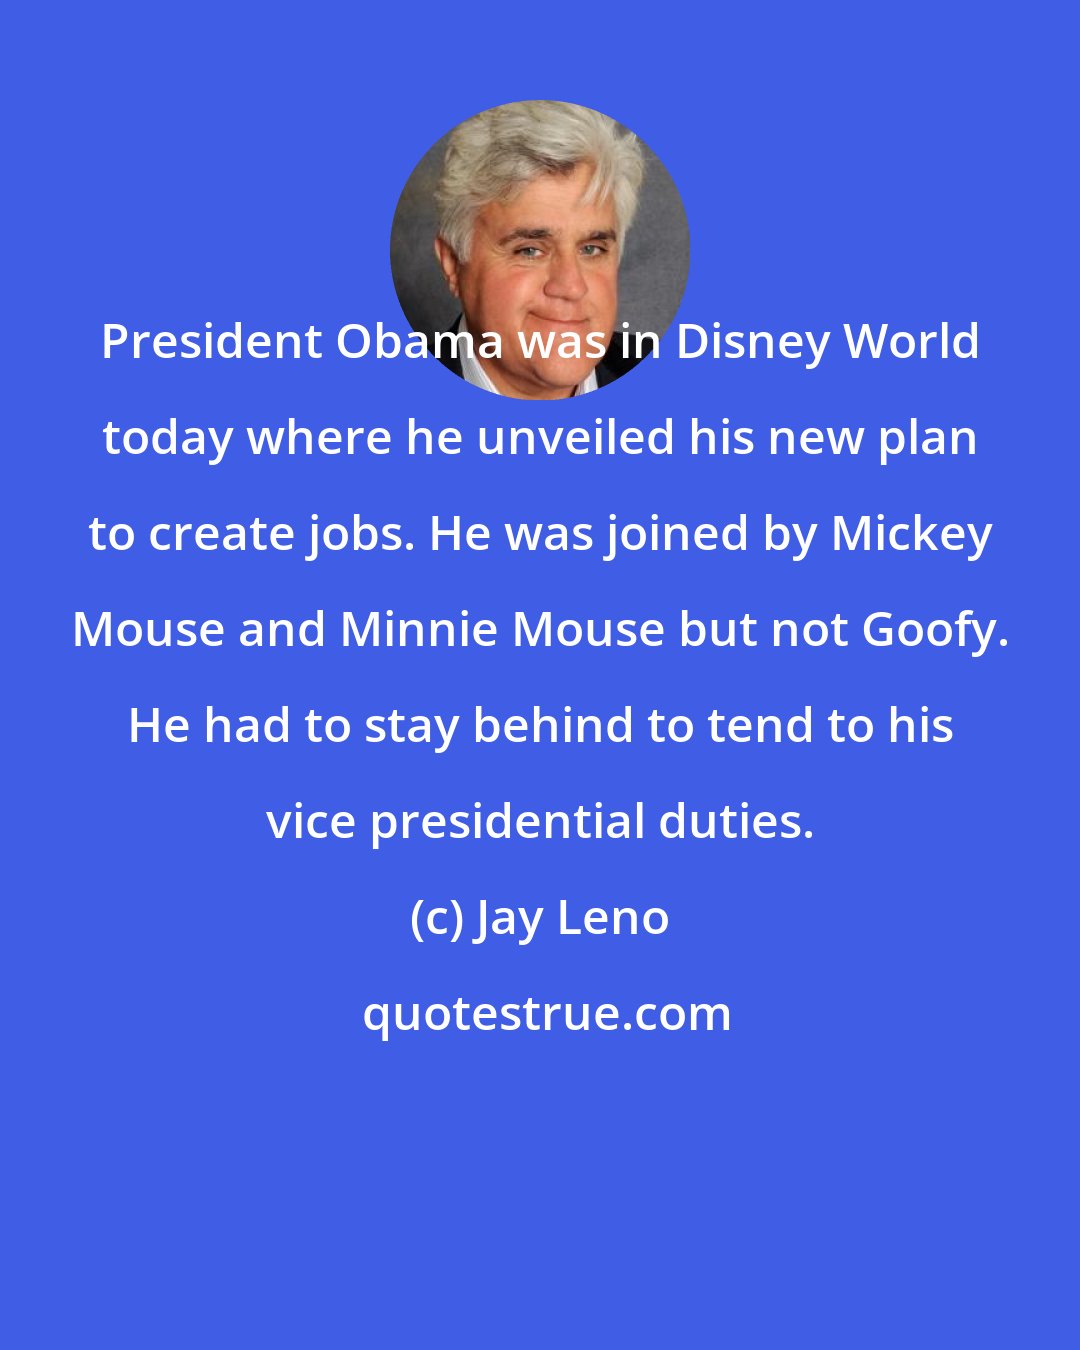 Jay Leno: President Obama was in Disney World today where he unveiled his new plan to create jobs. He was joined by Mickey Mouse and Minnie Mouse but not Goofy. He had to stay behind to tend to his vice presidential duties.